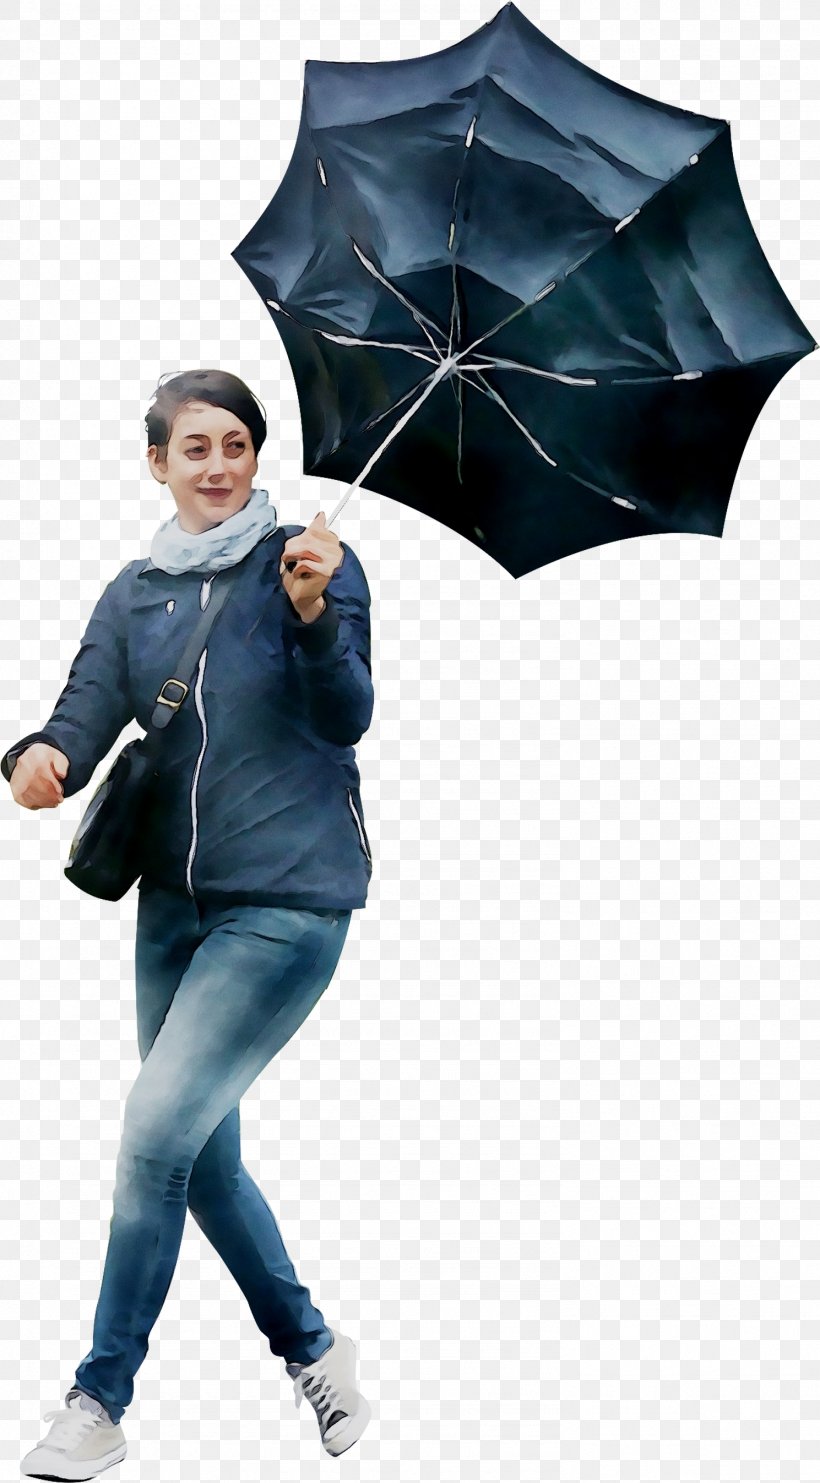 Electric Blue Outerwear, PNG, 1489x2694px, Electric Blue, Fashion Accessory, Outerwear, Umbrella Download Free